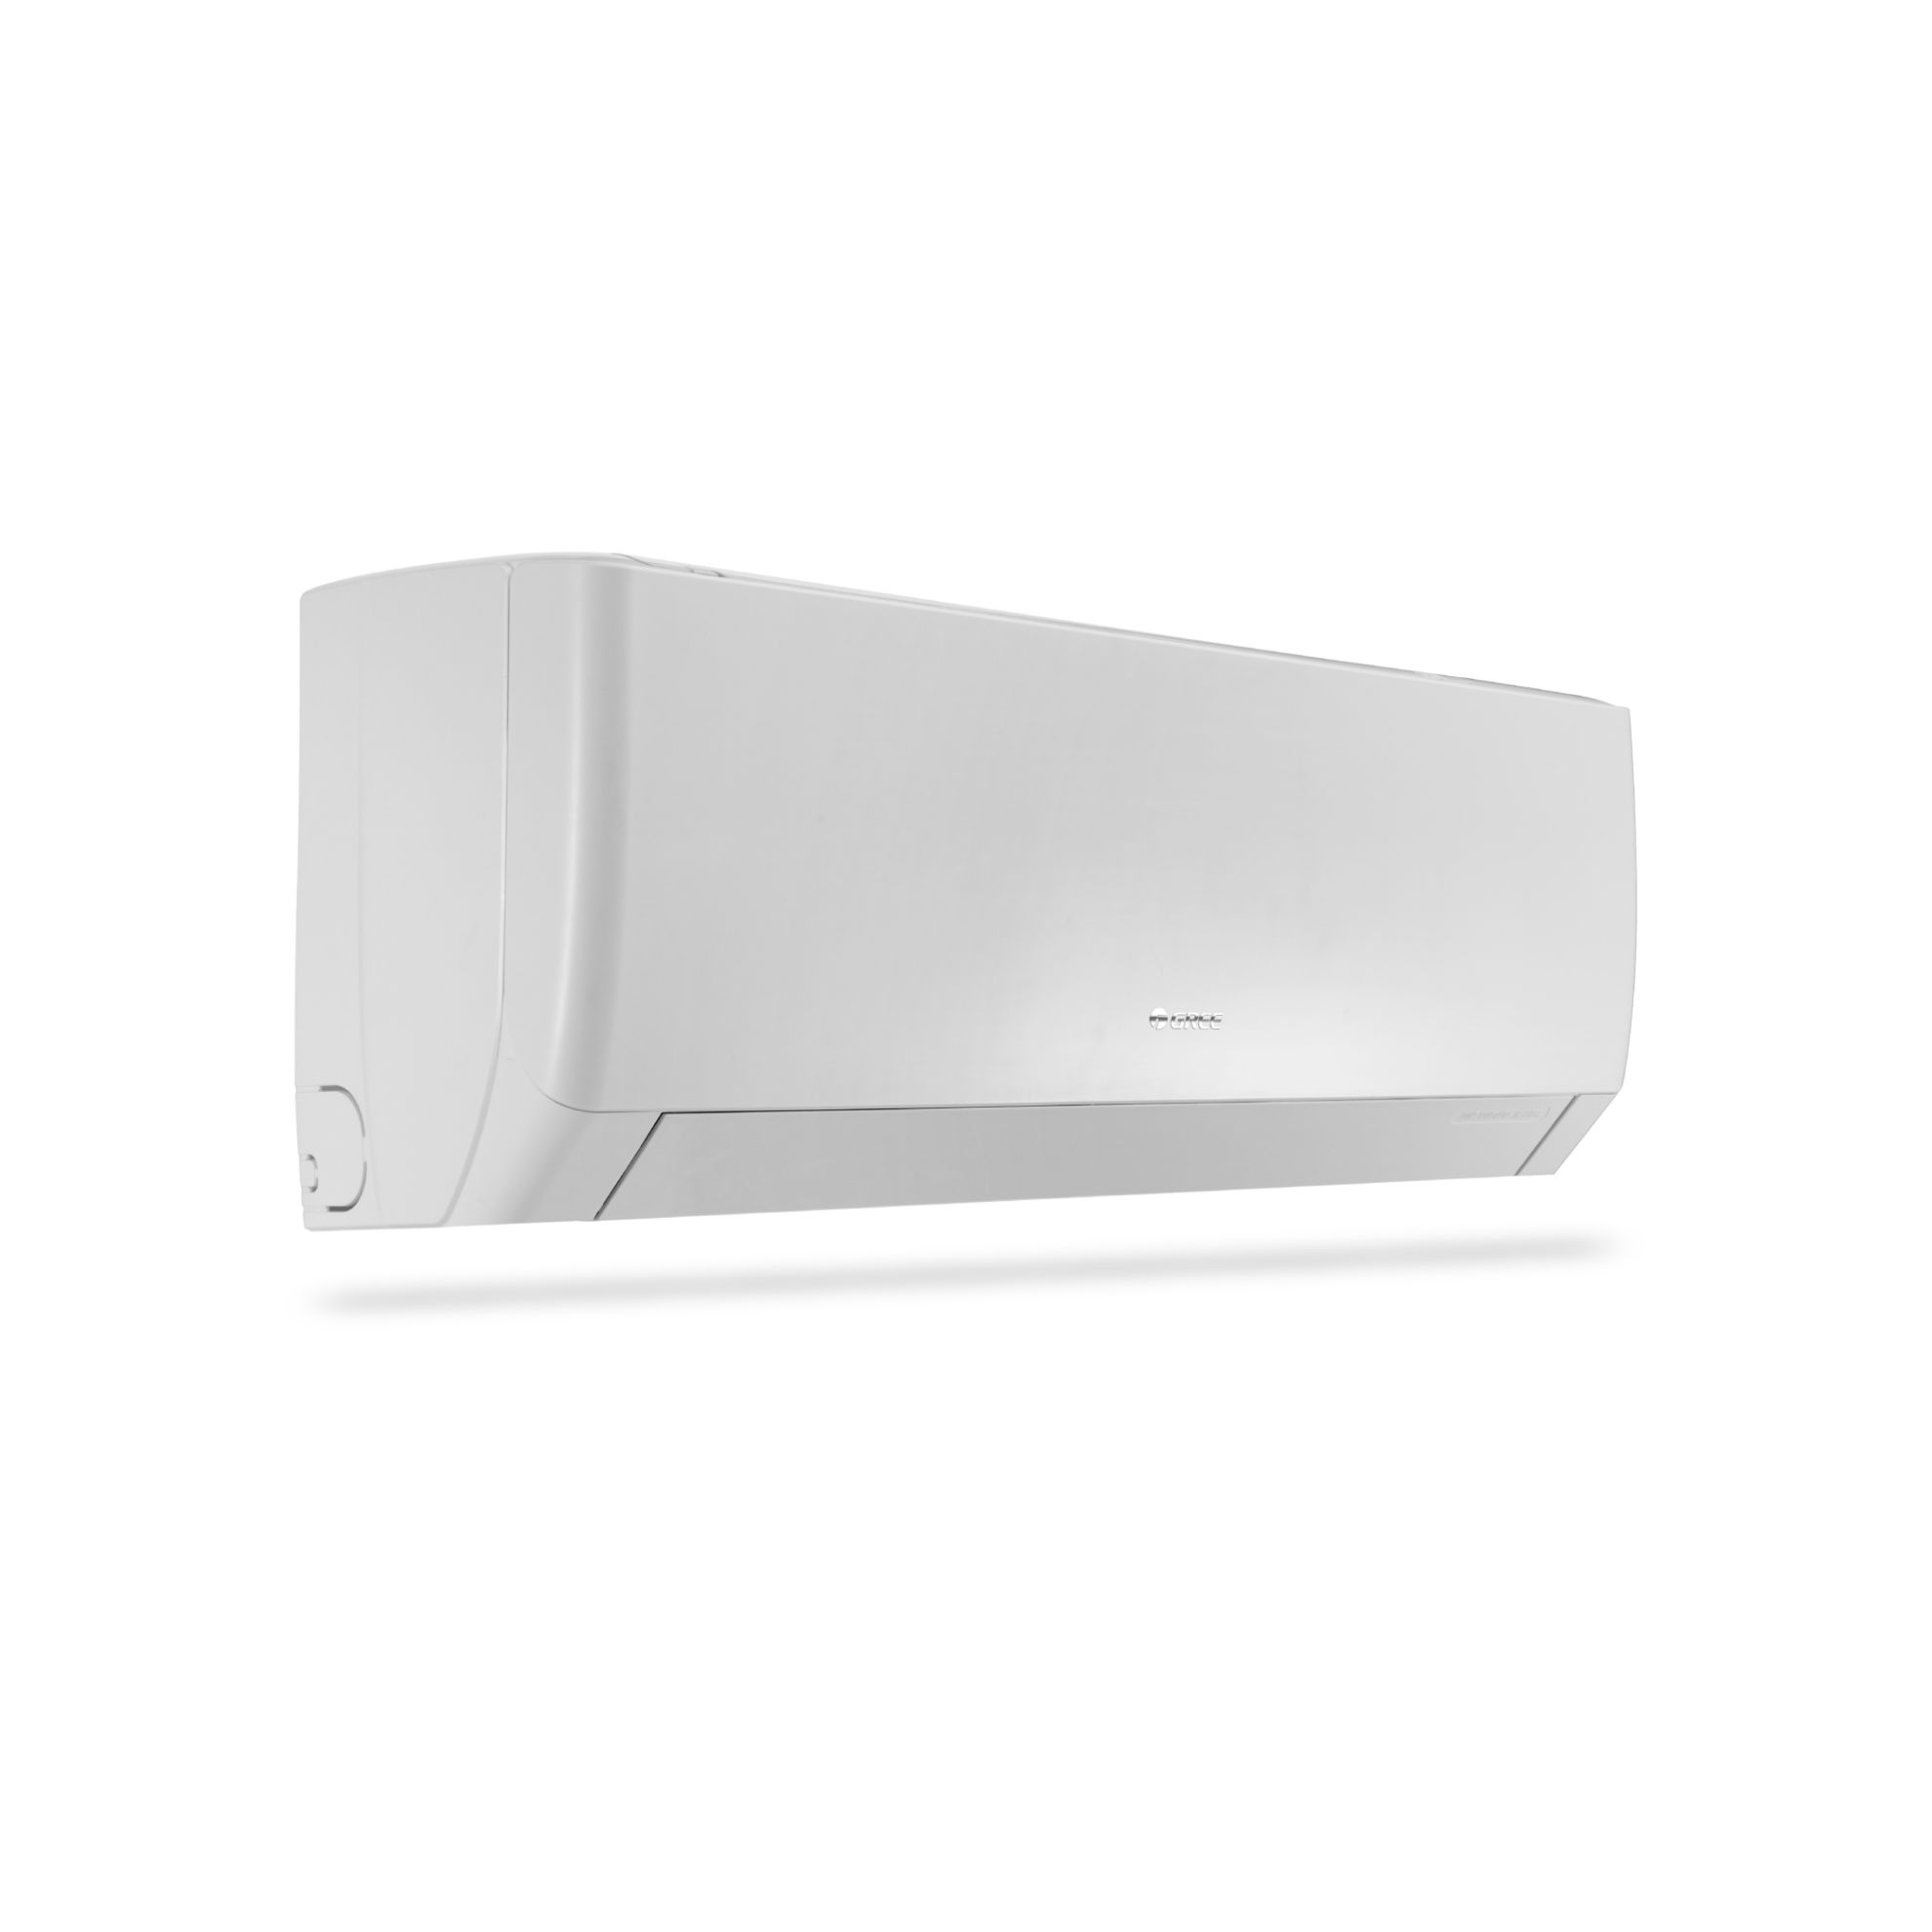 Picture of Gree - iSAVE PLUS-P24H3 - 2 Ton|Inverter|Wall Split AC